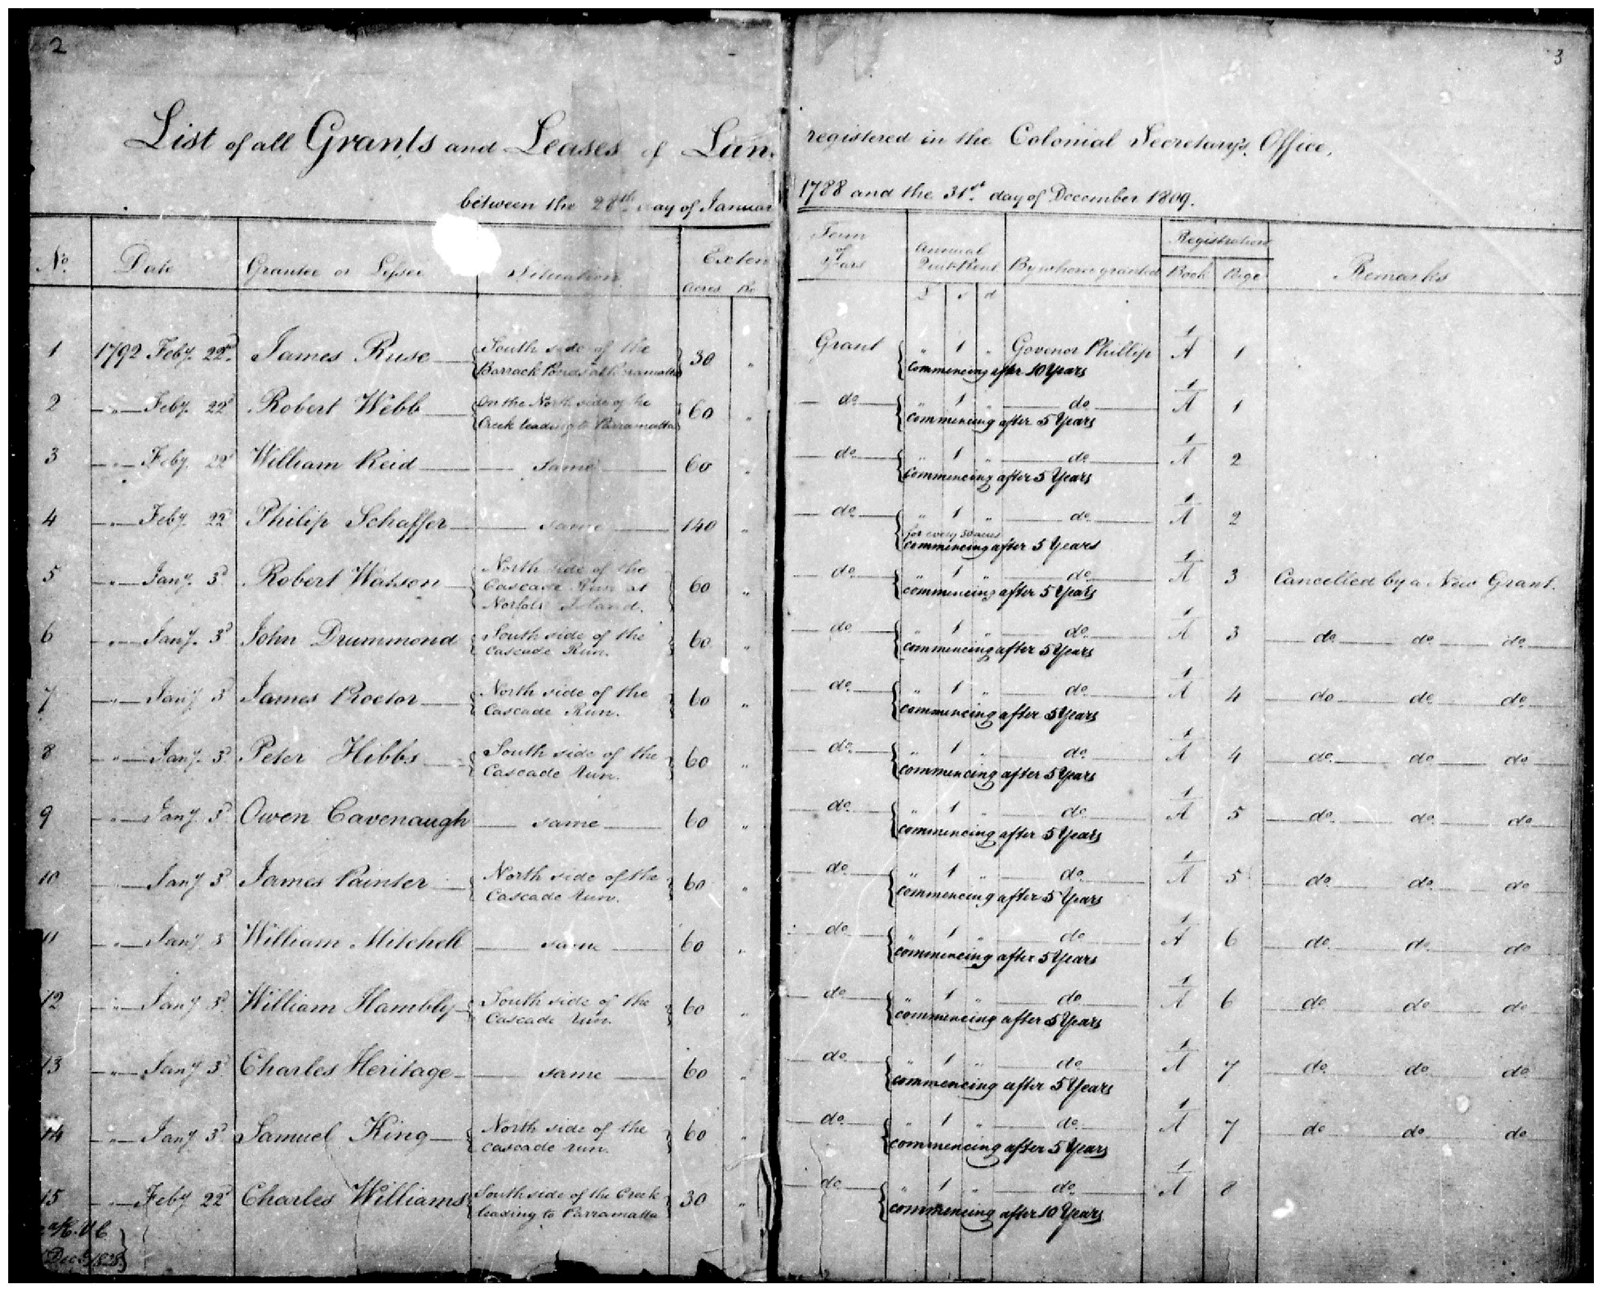 https://www.records.nsw.gov.au/sites/default/files/Collection/Col%20Sec/Colonial-Secretary-James-Ruse-first-land-grant-NRS-898-9-2731-Fiche-3267-p-2.jpg